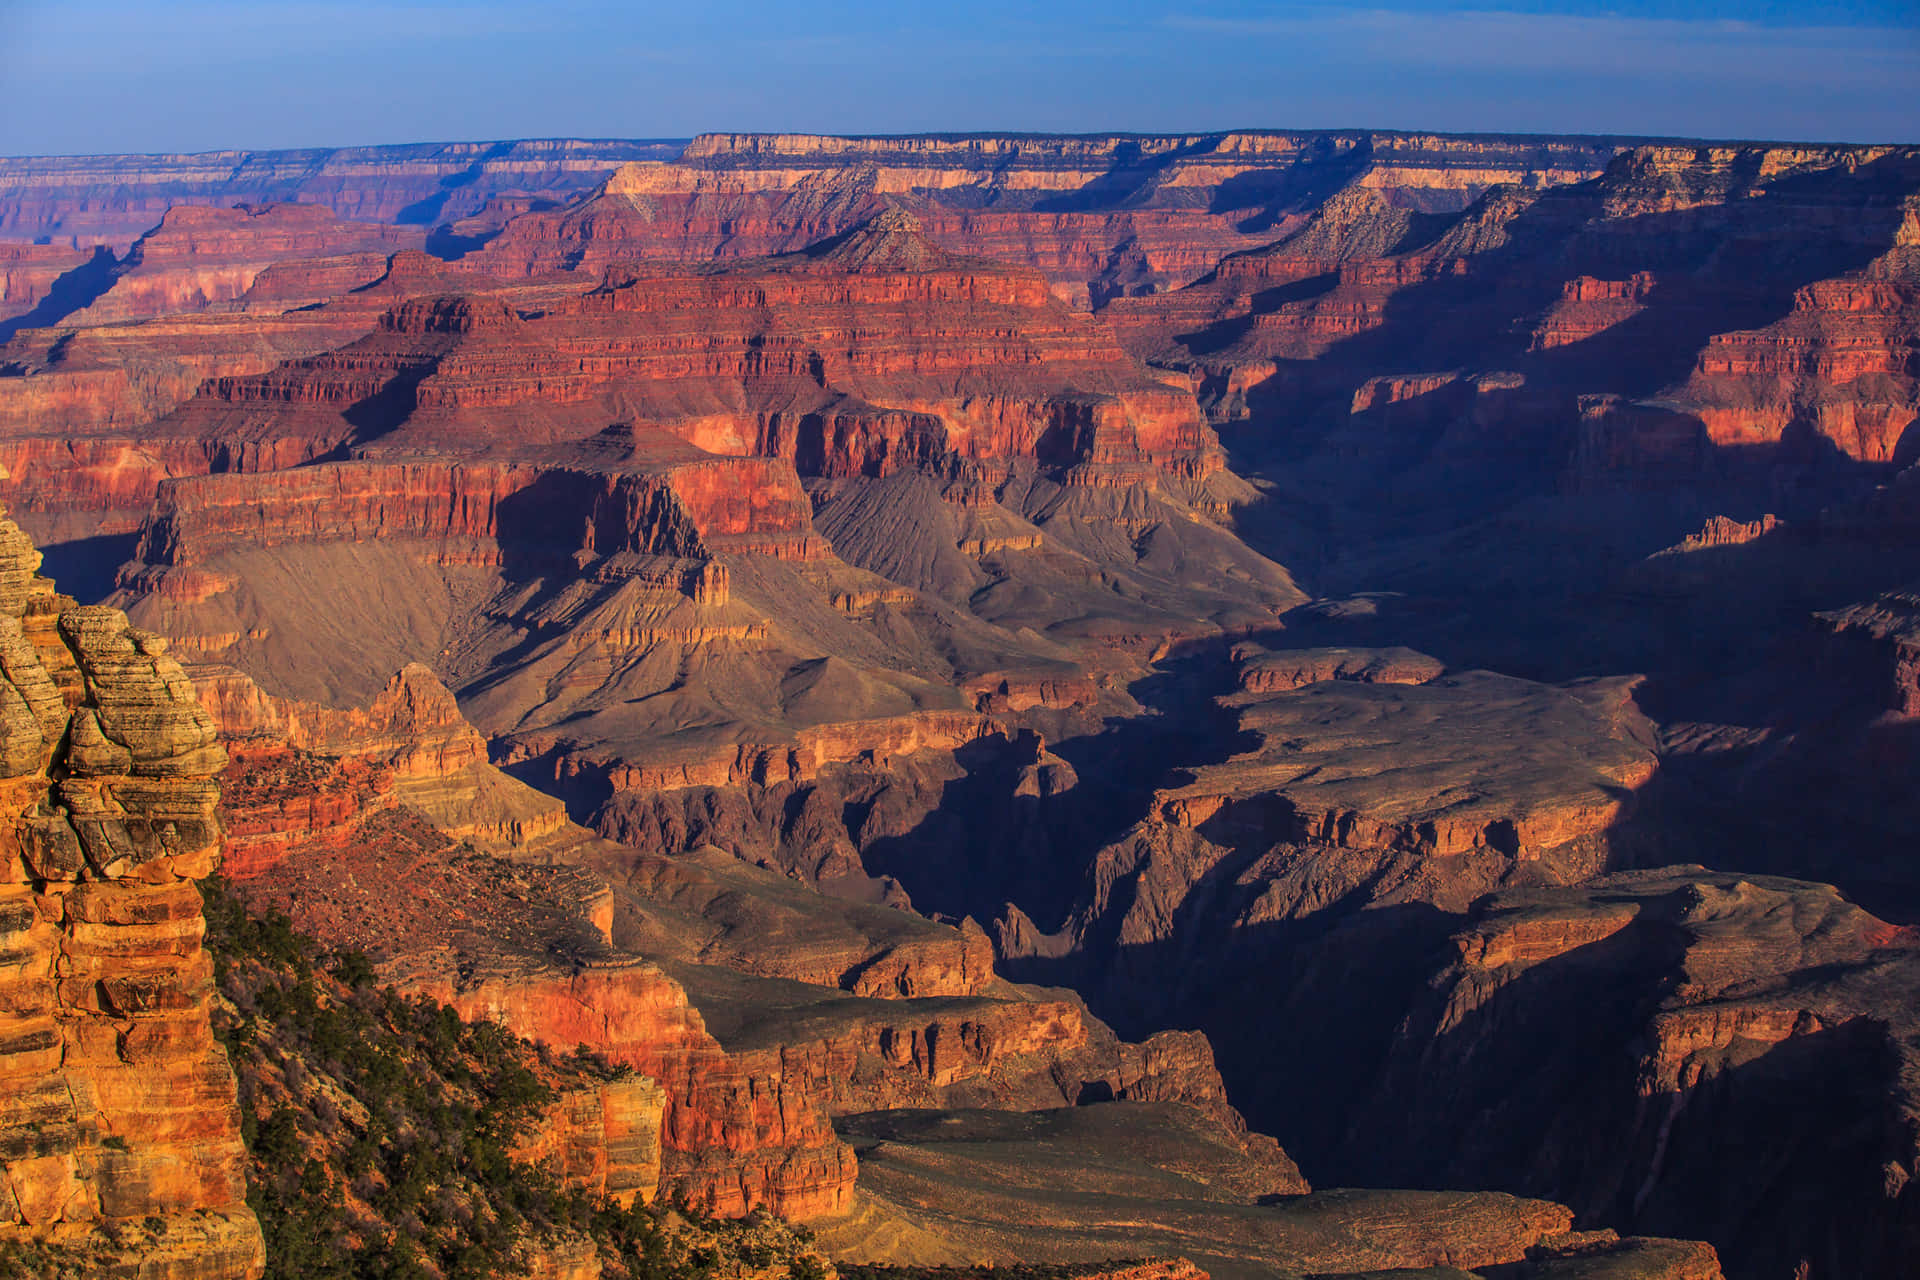 Explore the wonders of nature at the Grand Canyon!